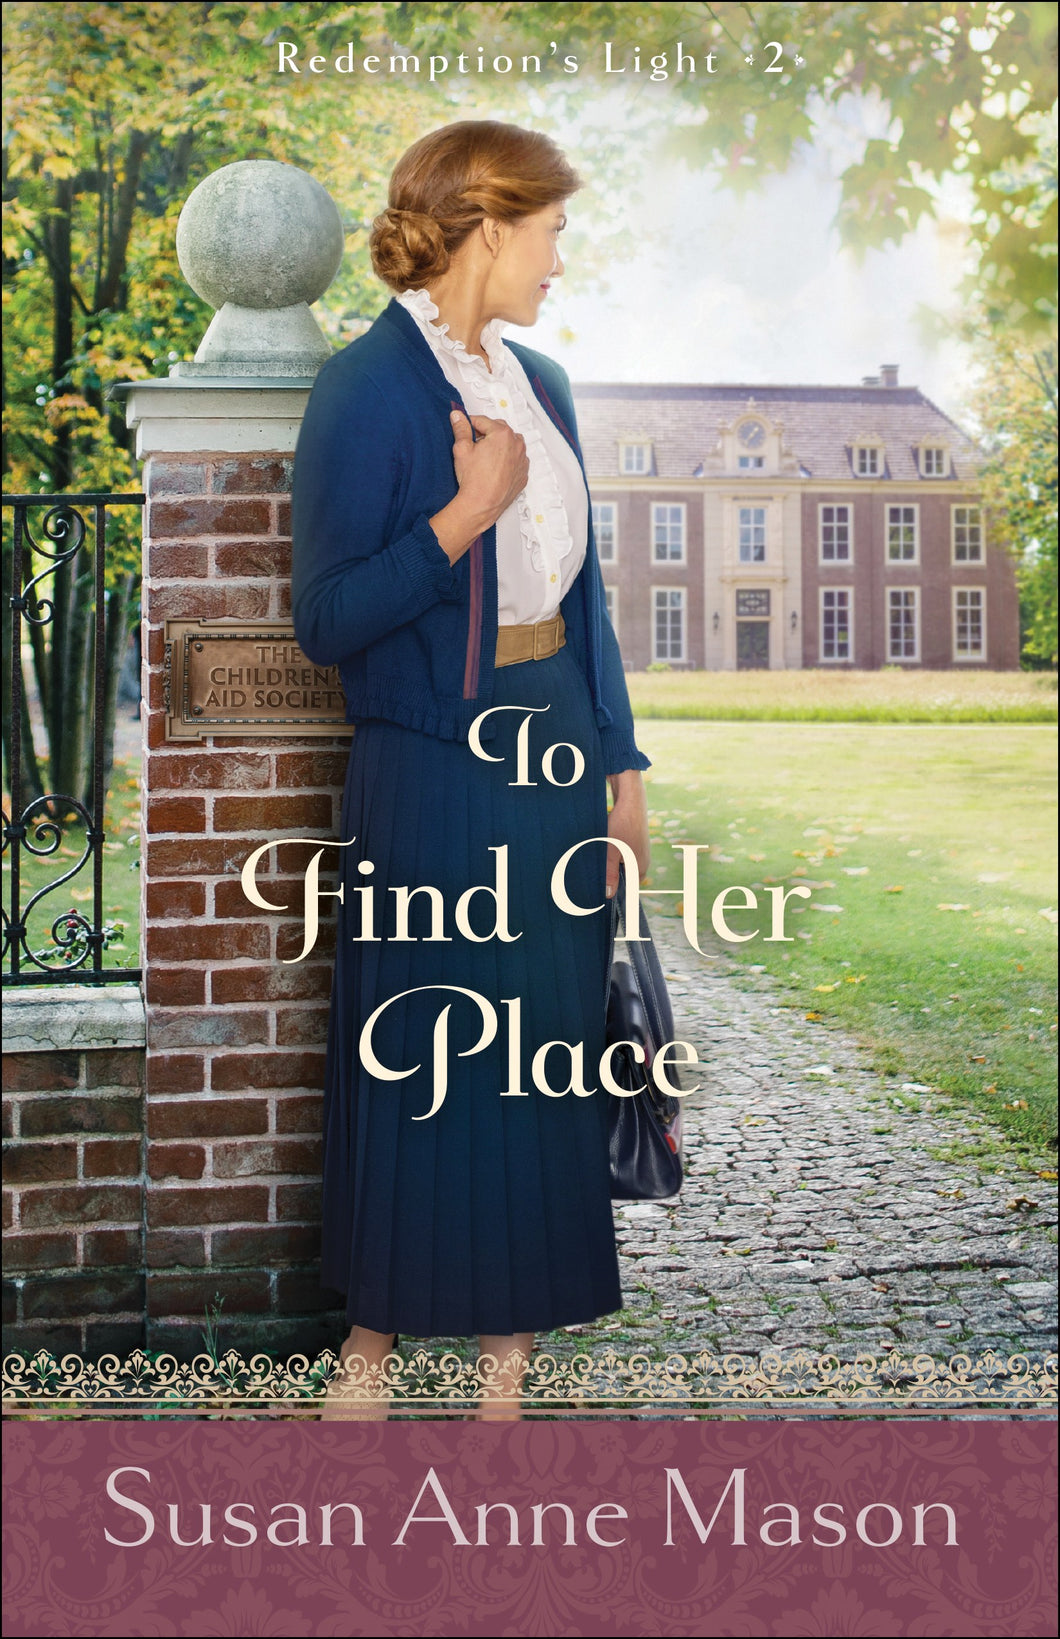 To Find Her Place (Redemption's Light #2)